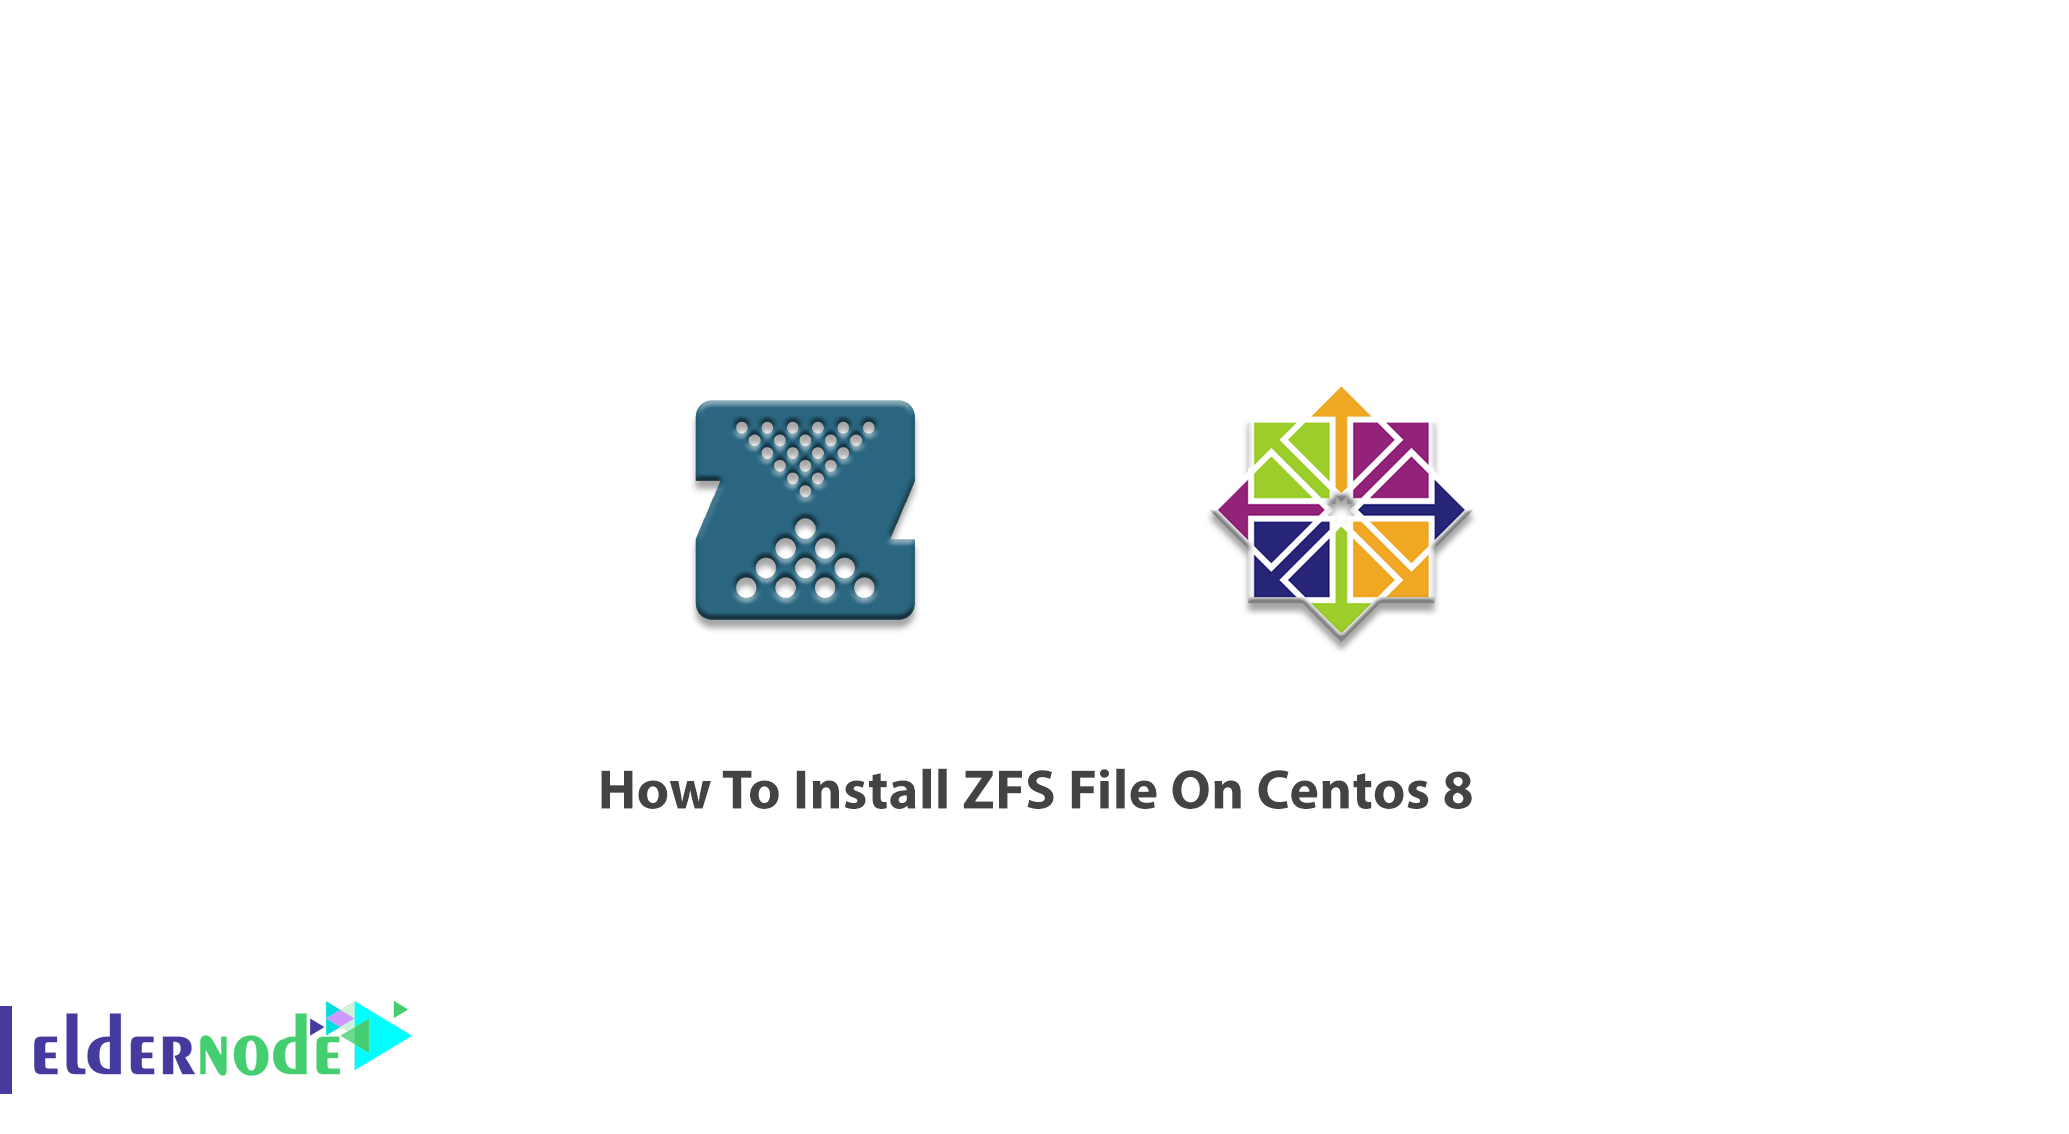 How To Install ZFS File On Centos 8